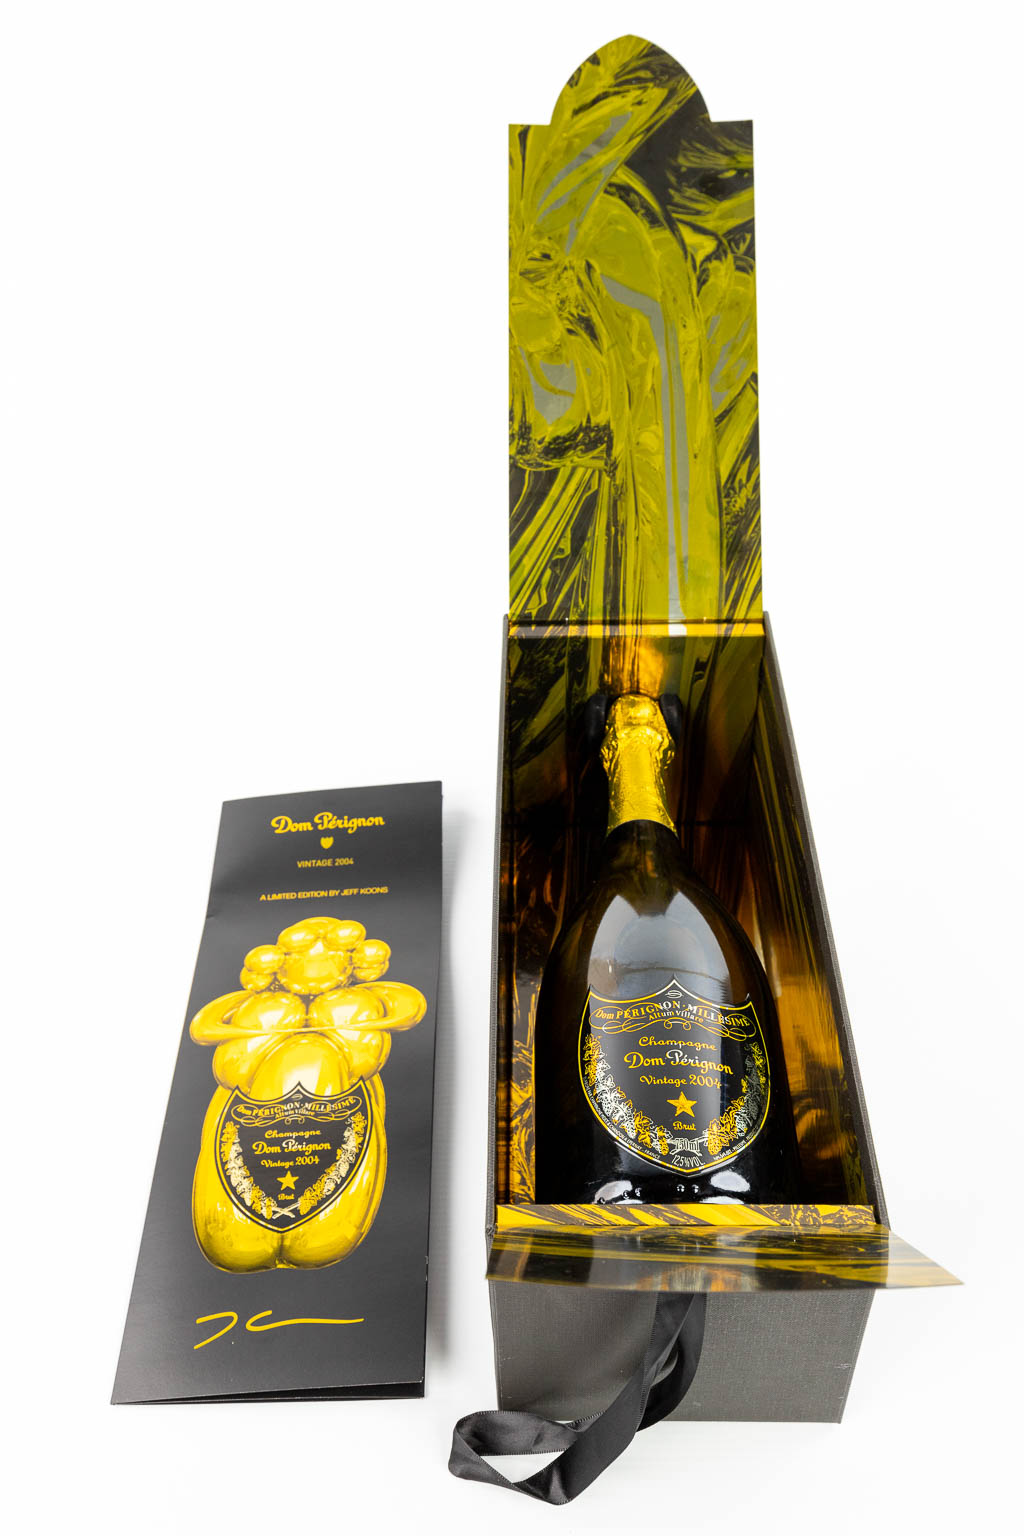 Dom Pérignon Champagne 2004 (Limited Edition by Jeff Koons), 3 flessen 